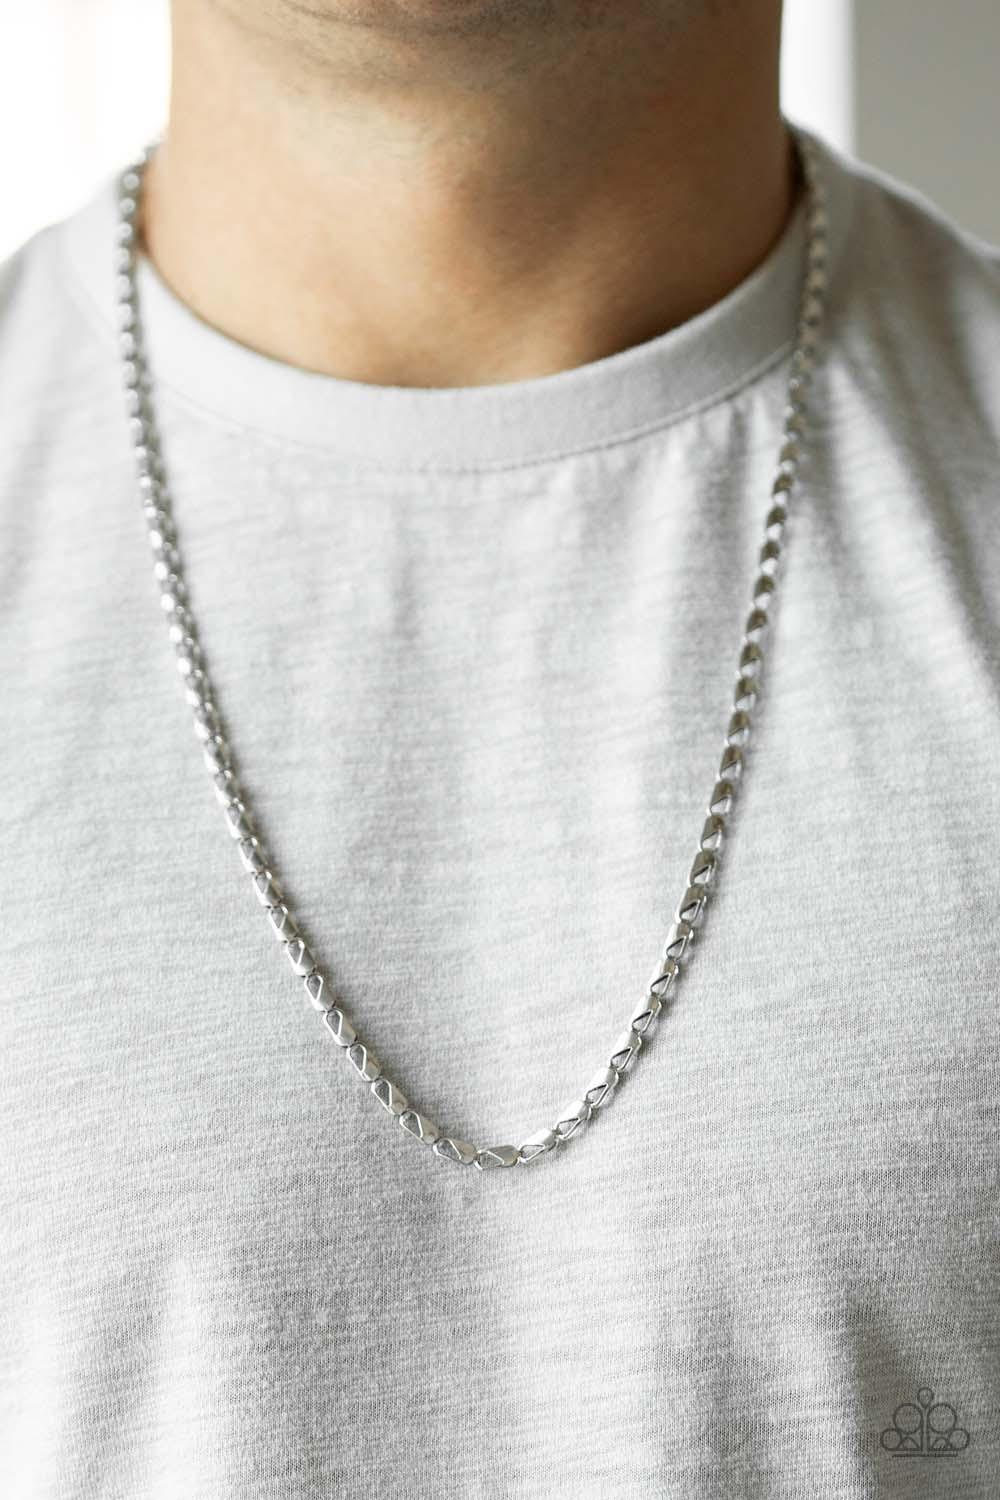 Paparazzi Accessories Free Agency - Silver Featuring clasp-like links, an ornate silver chain drapes across the chest for a causal look. Features an adjustable clasp closure. Sold as one individual necklace. Jewelry